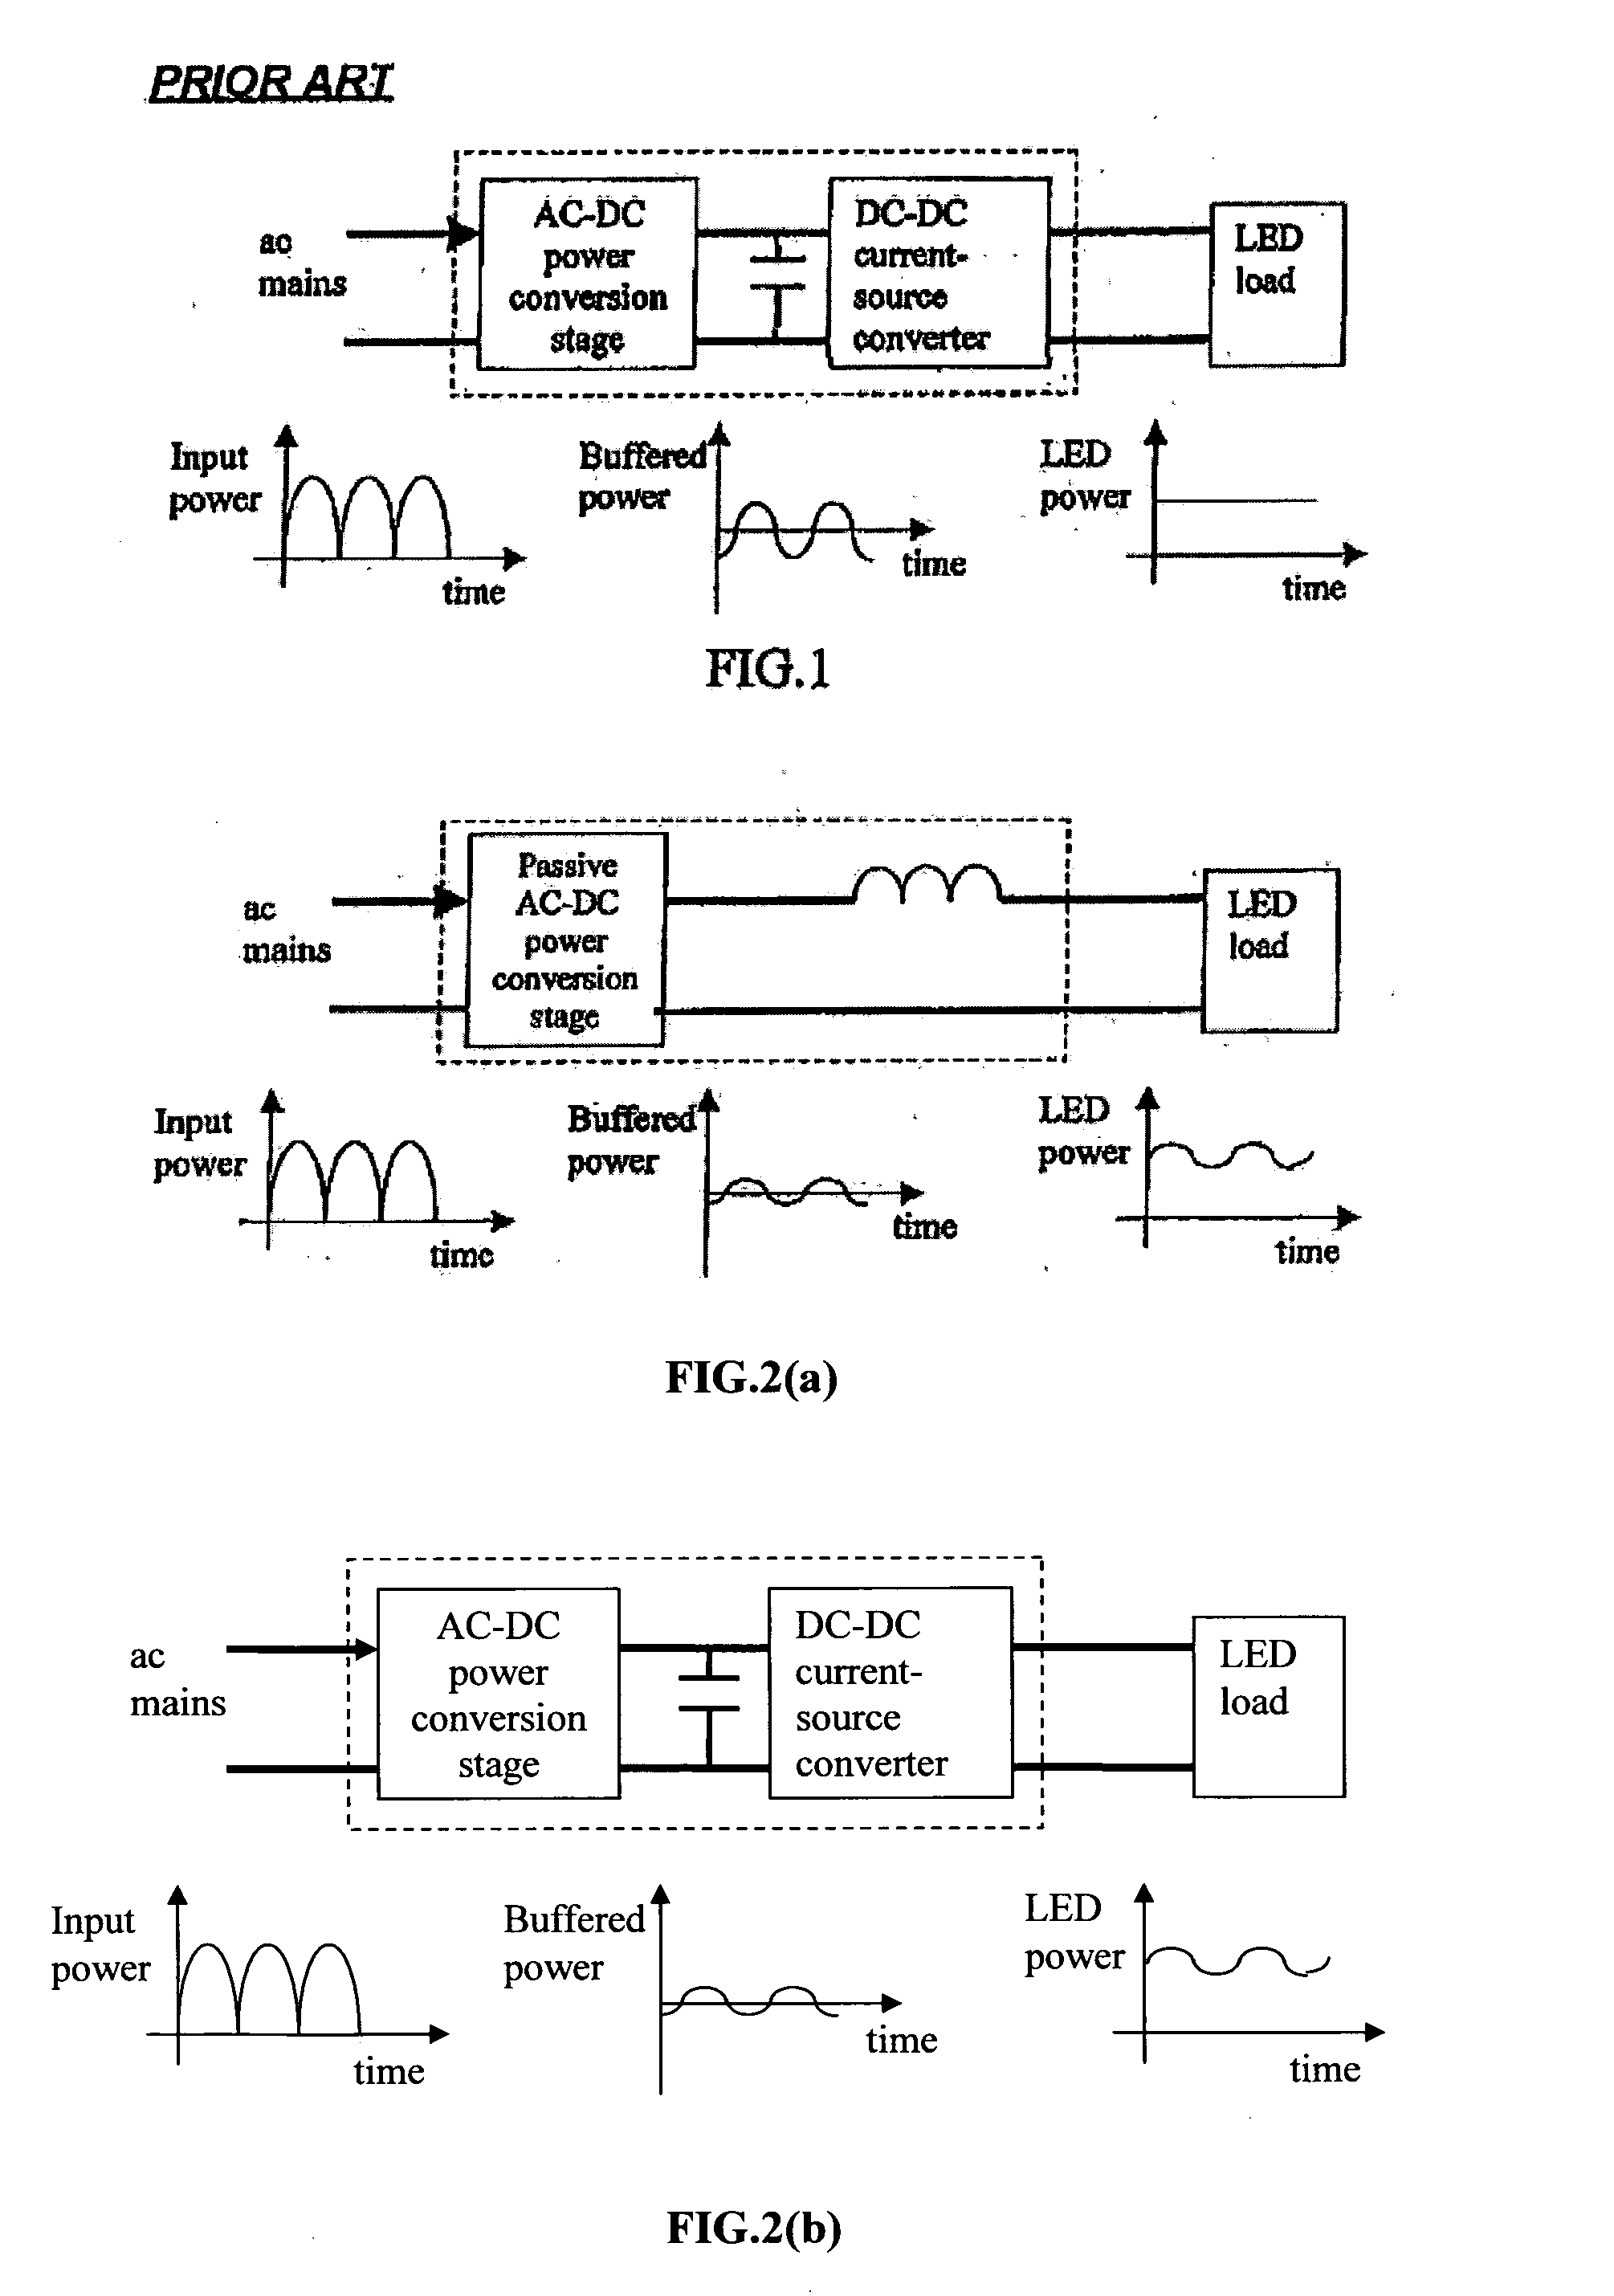 Apparatus and methods of operation of passive and active LED lighting equipment